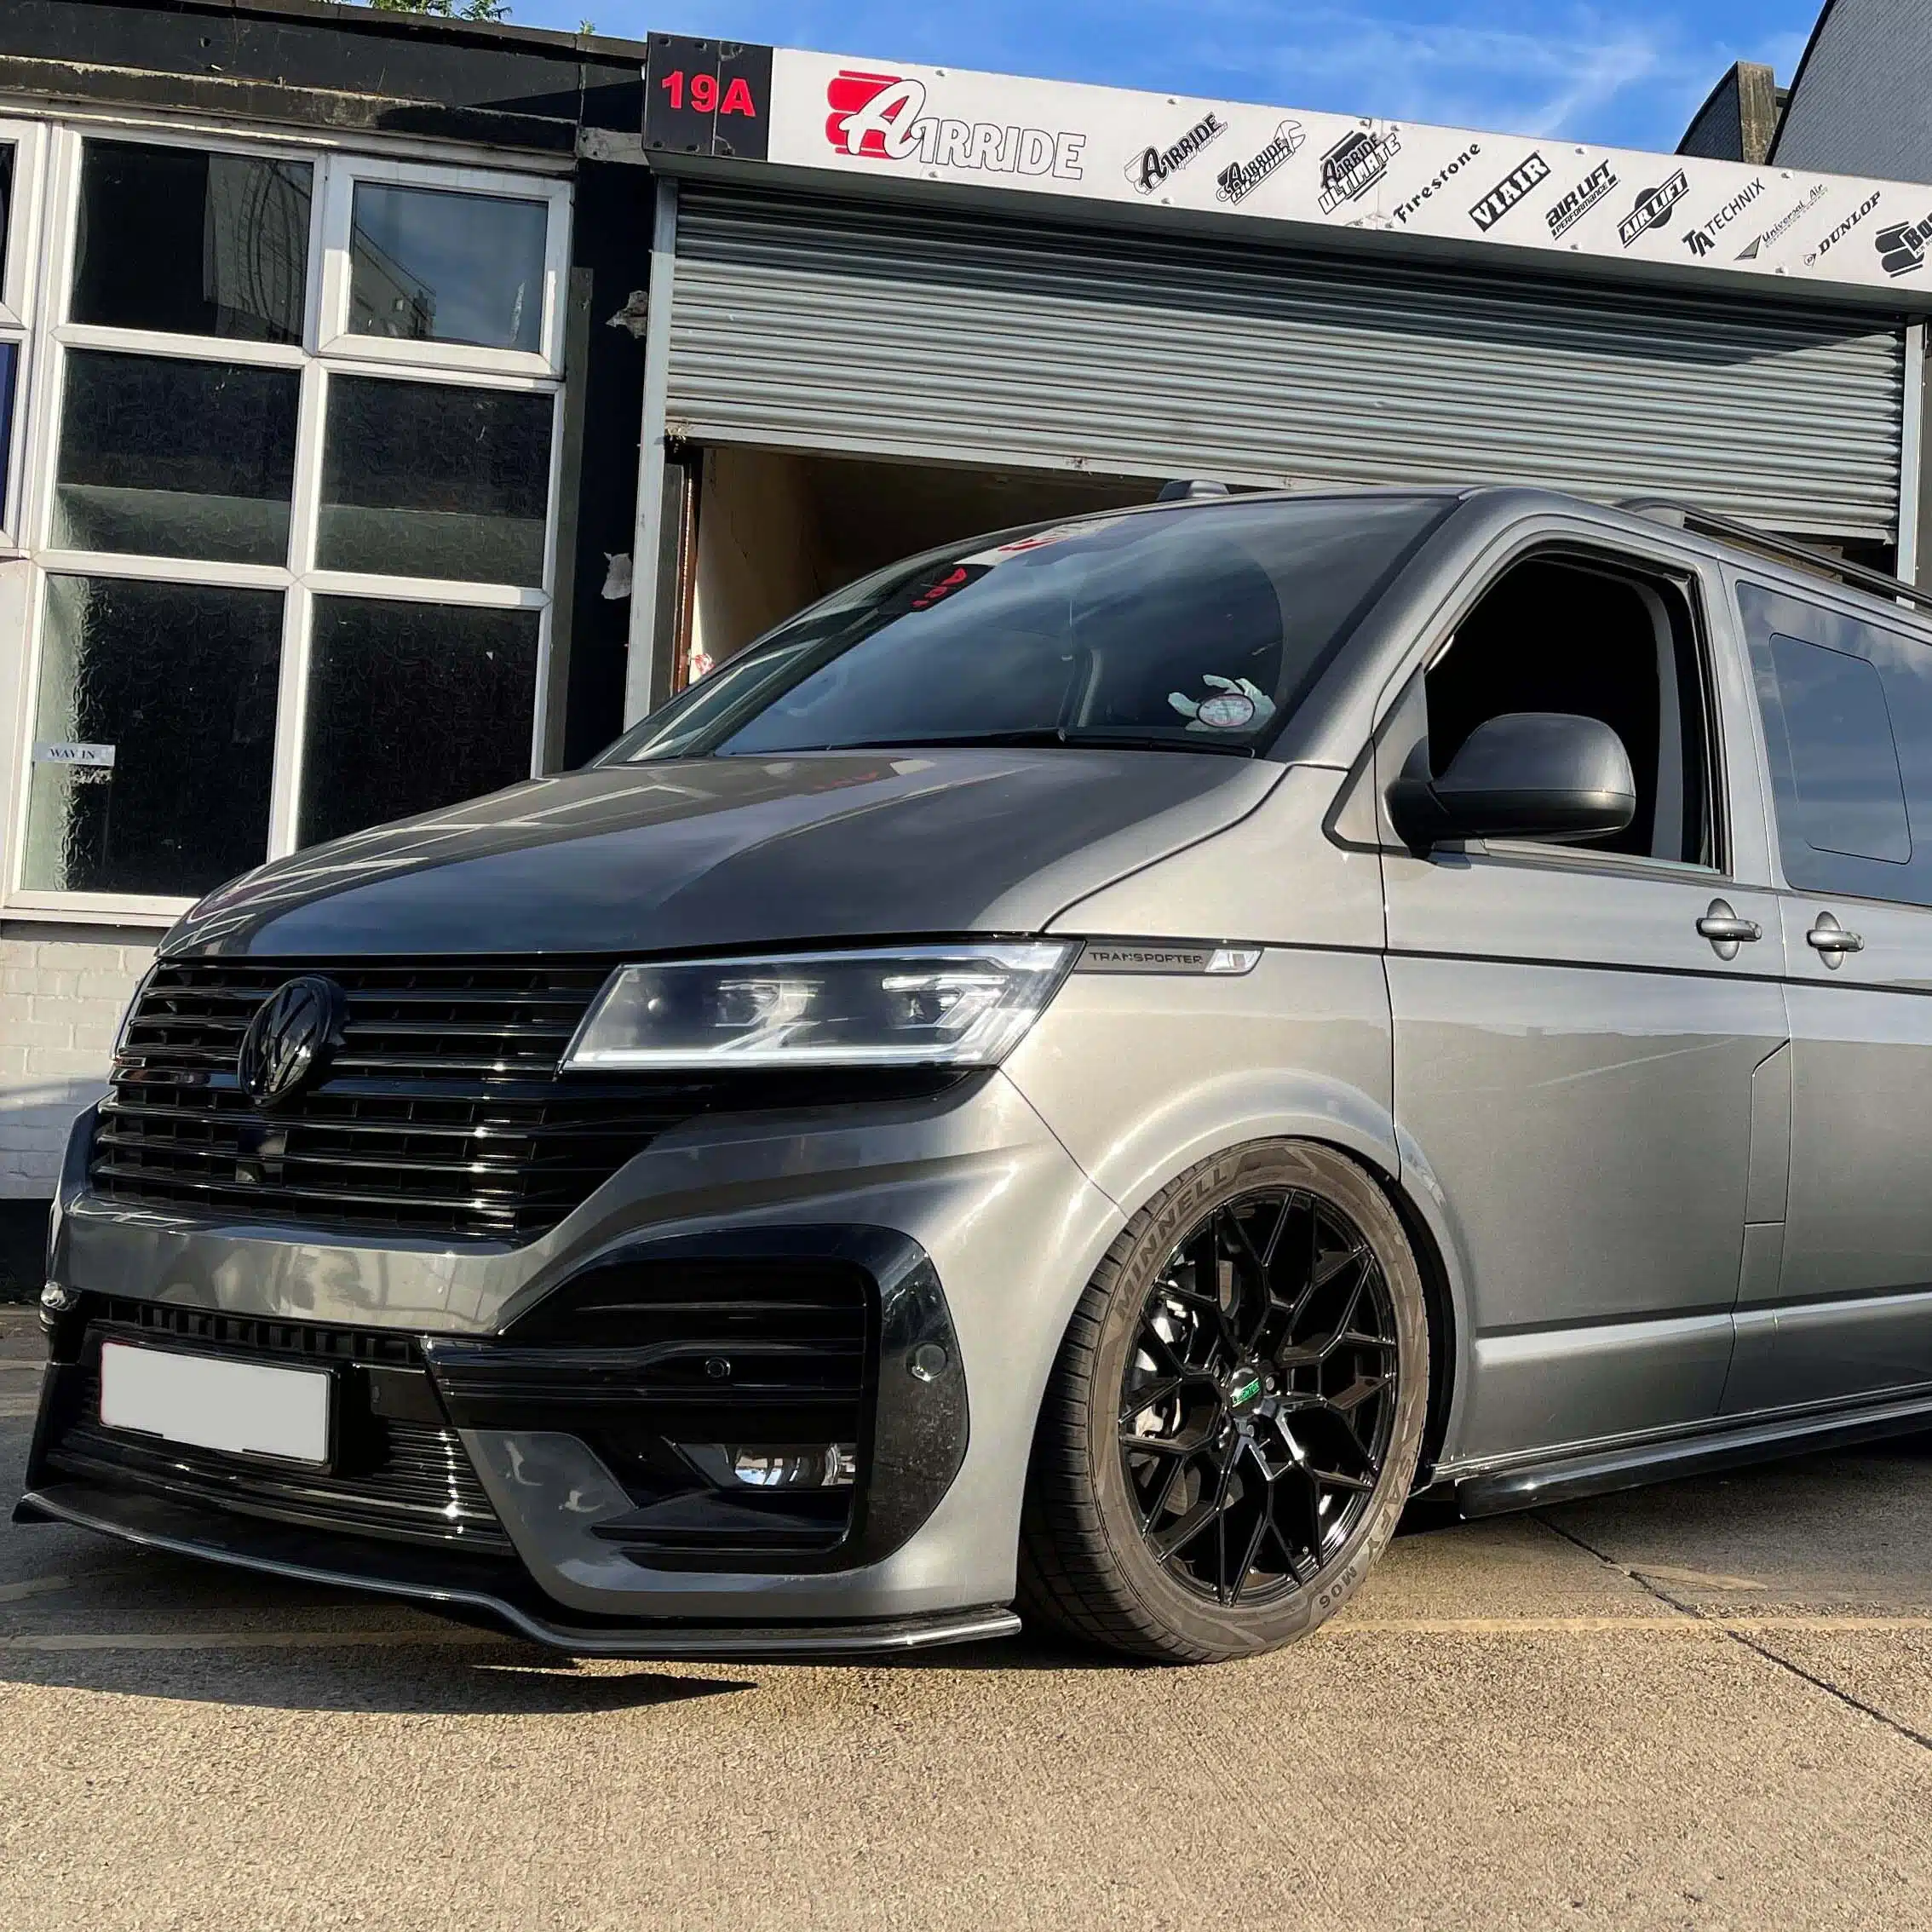 Lowered grey VW Transporter T6 outside AirRide